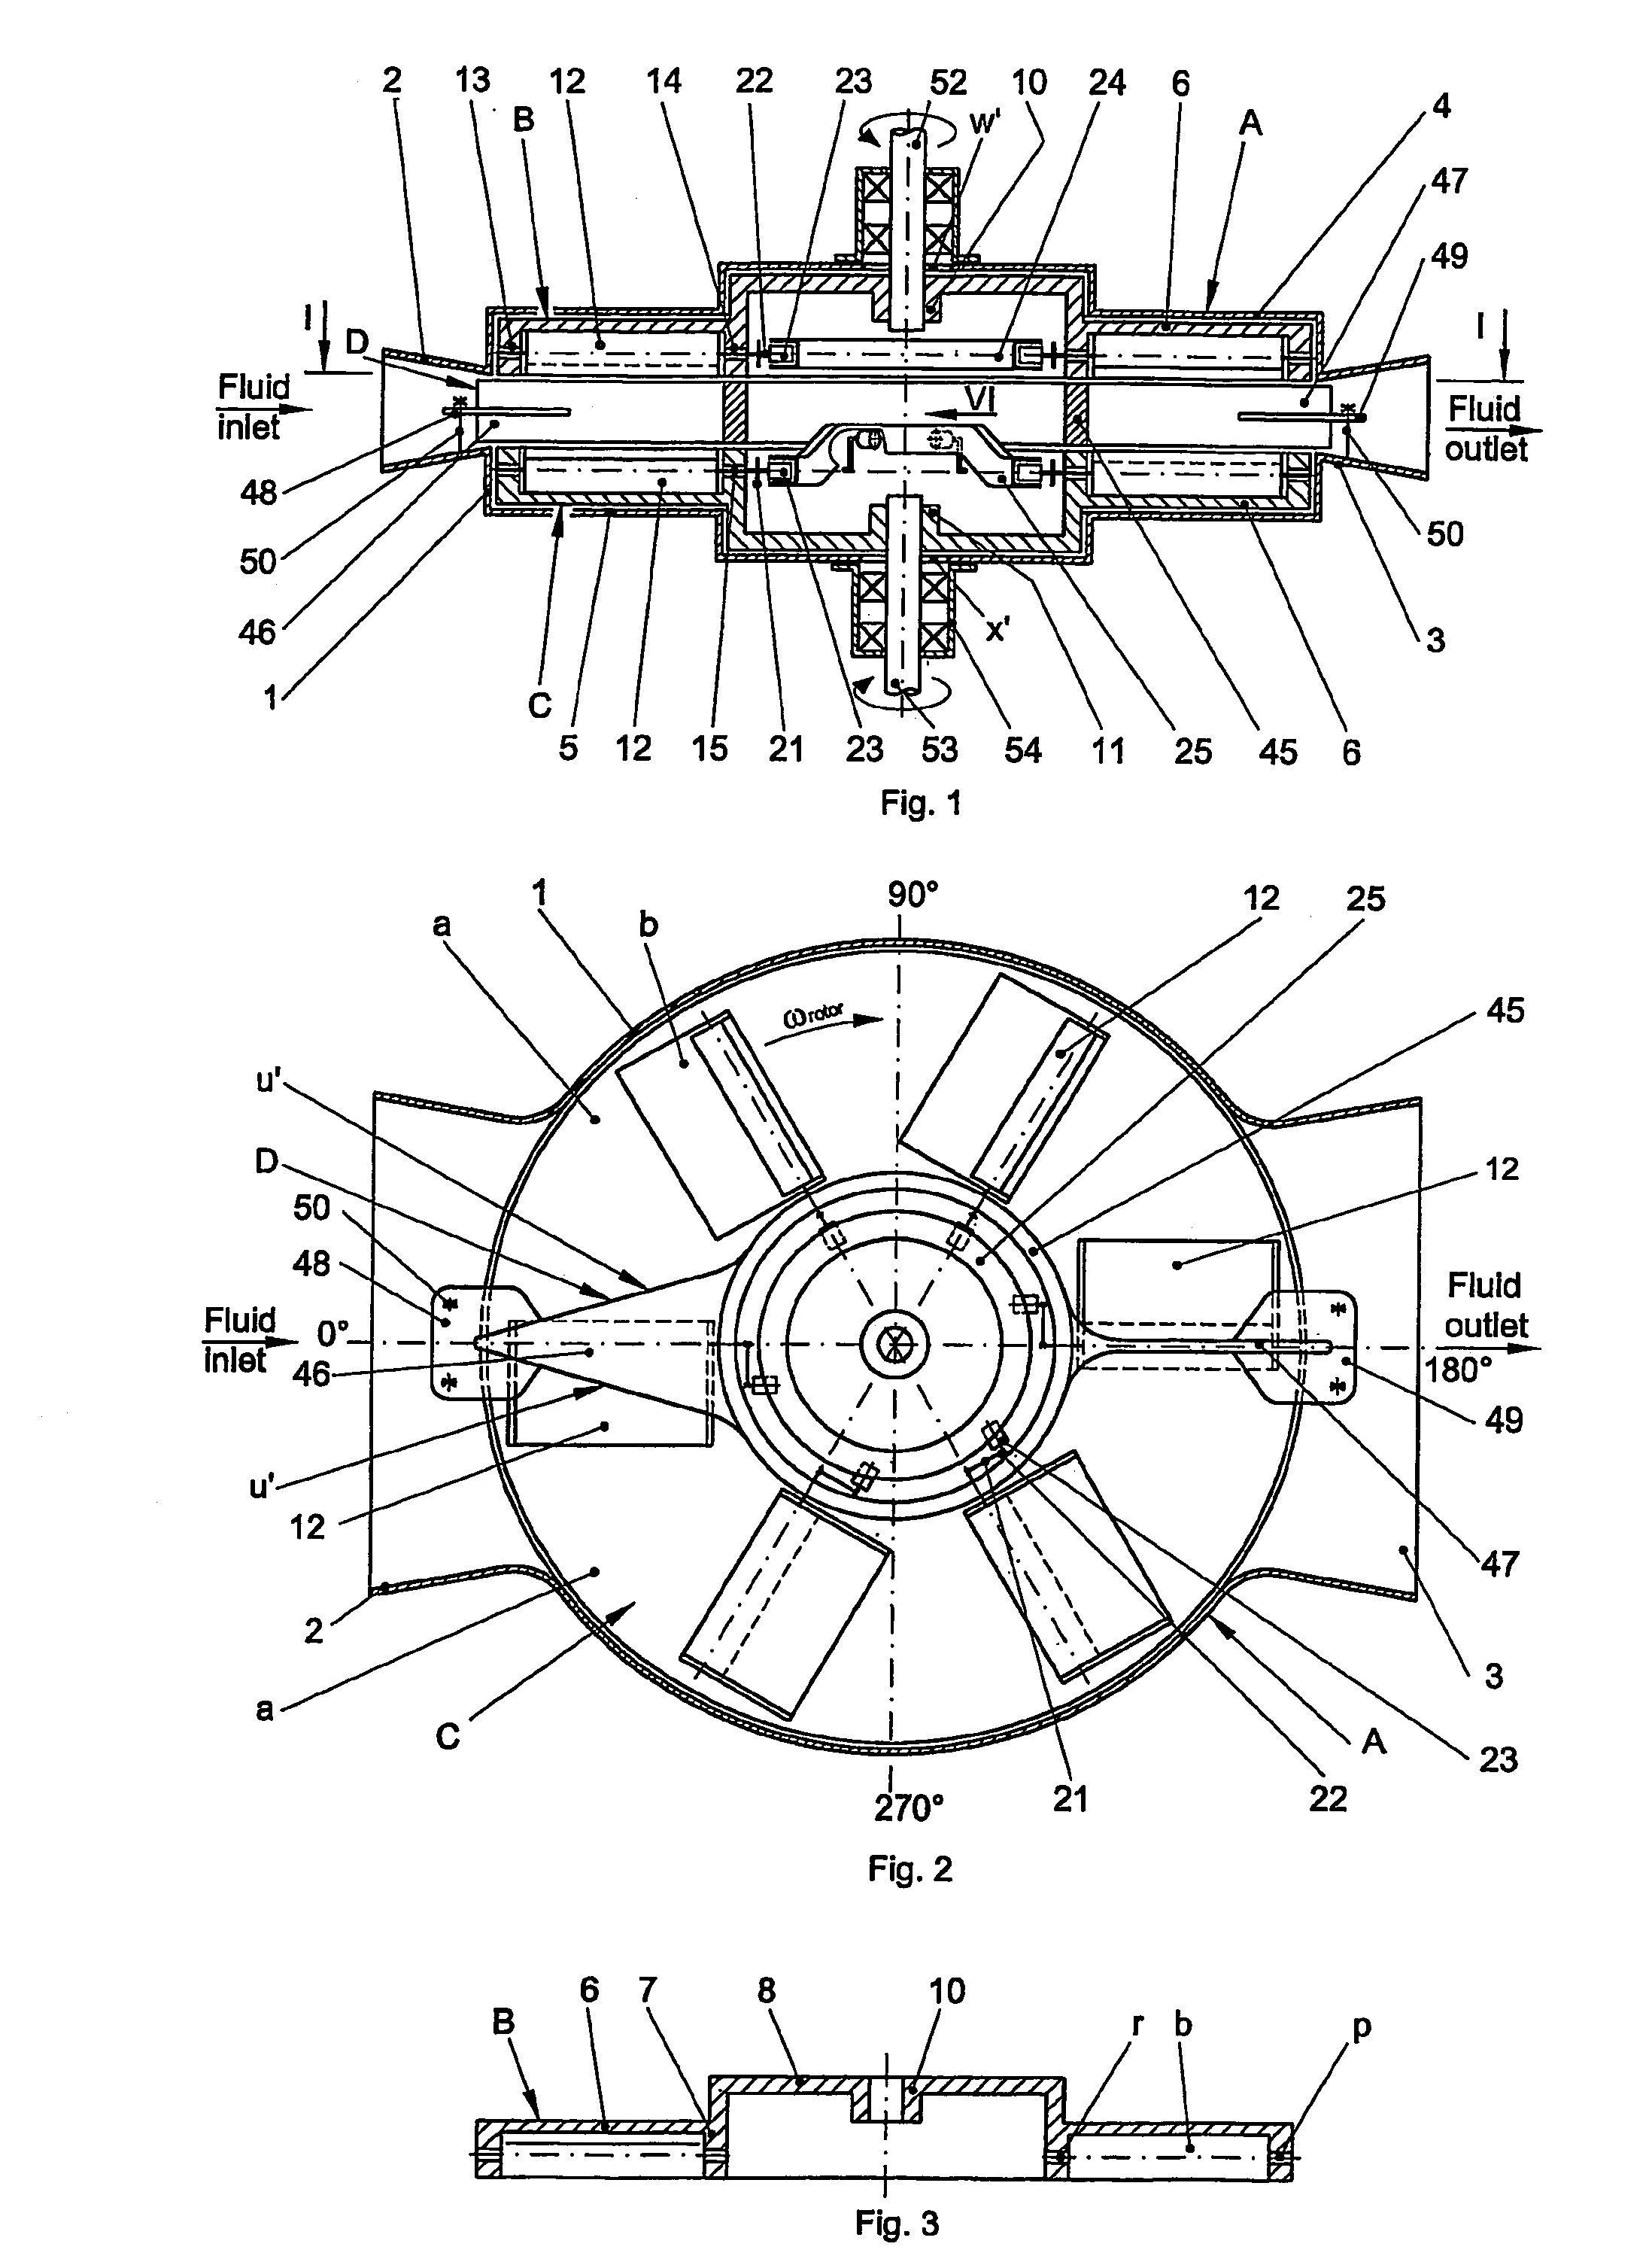 Hydraulic or pneumatic machine with tilting blades